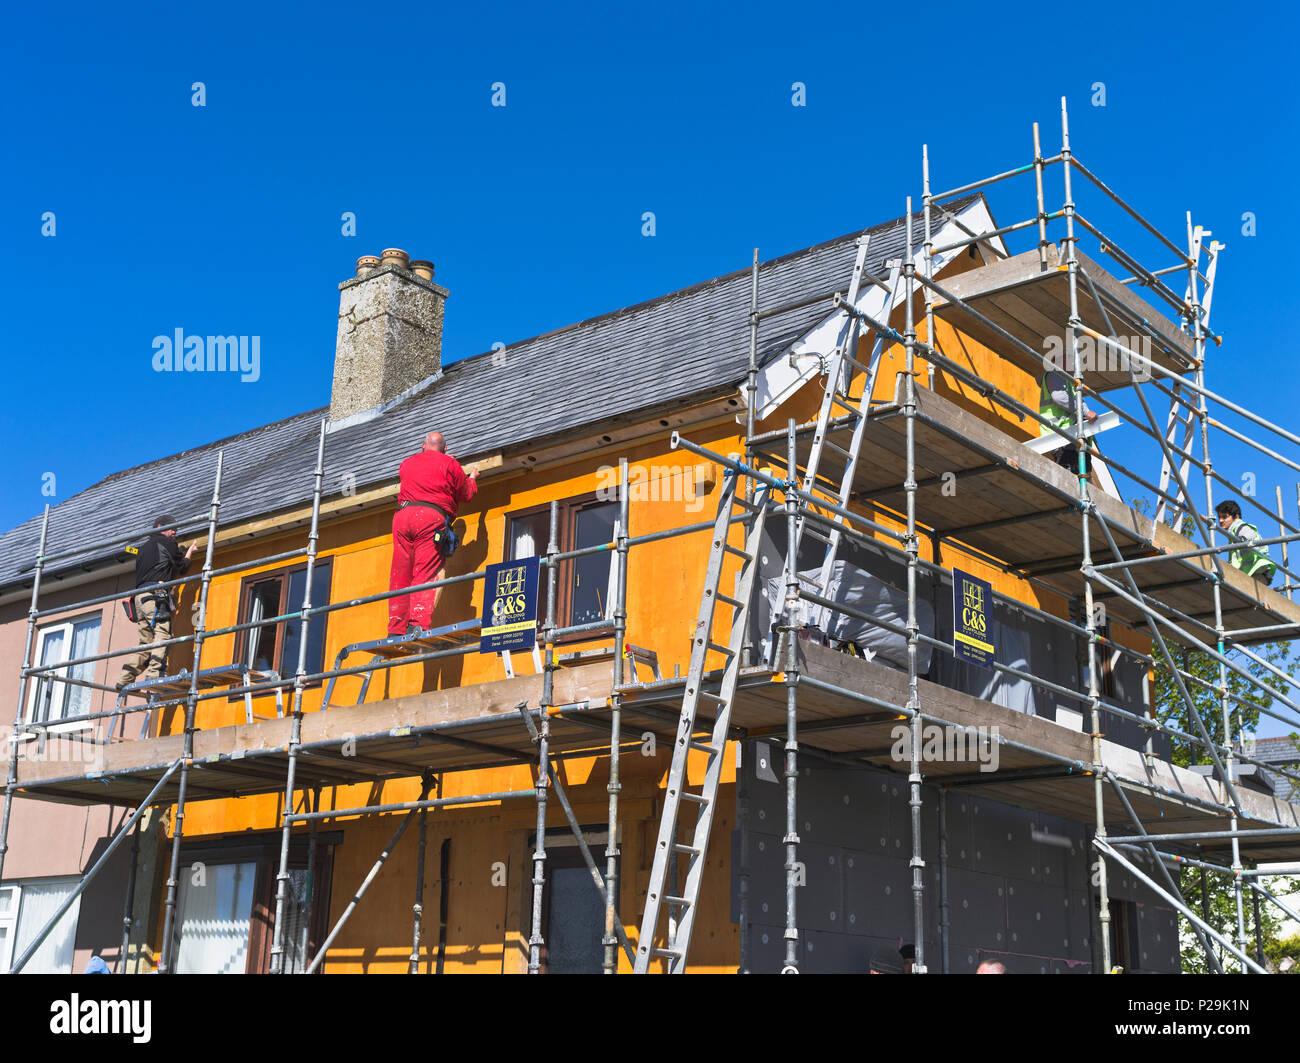 dh Heating Wall insulation HOUSES UK External thermal insulating exterior foam facade outside walls home Scotland house retrofit installation Stock Photo